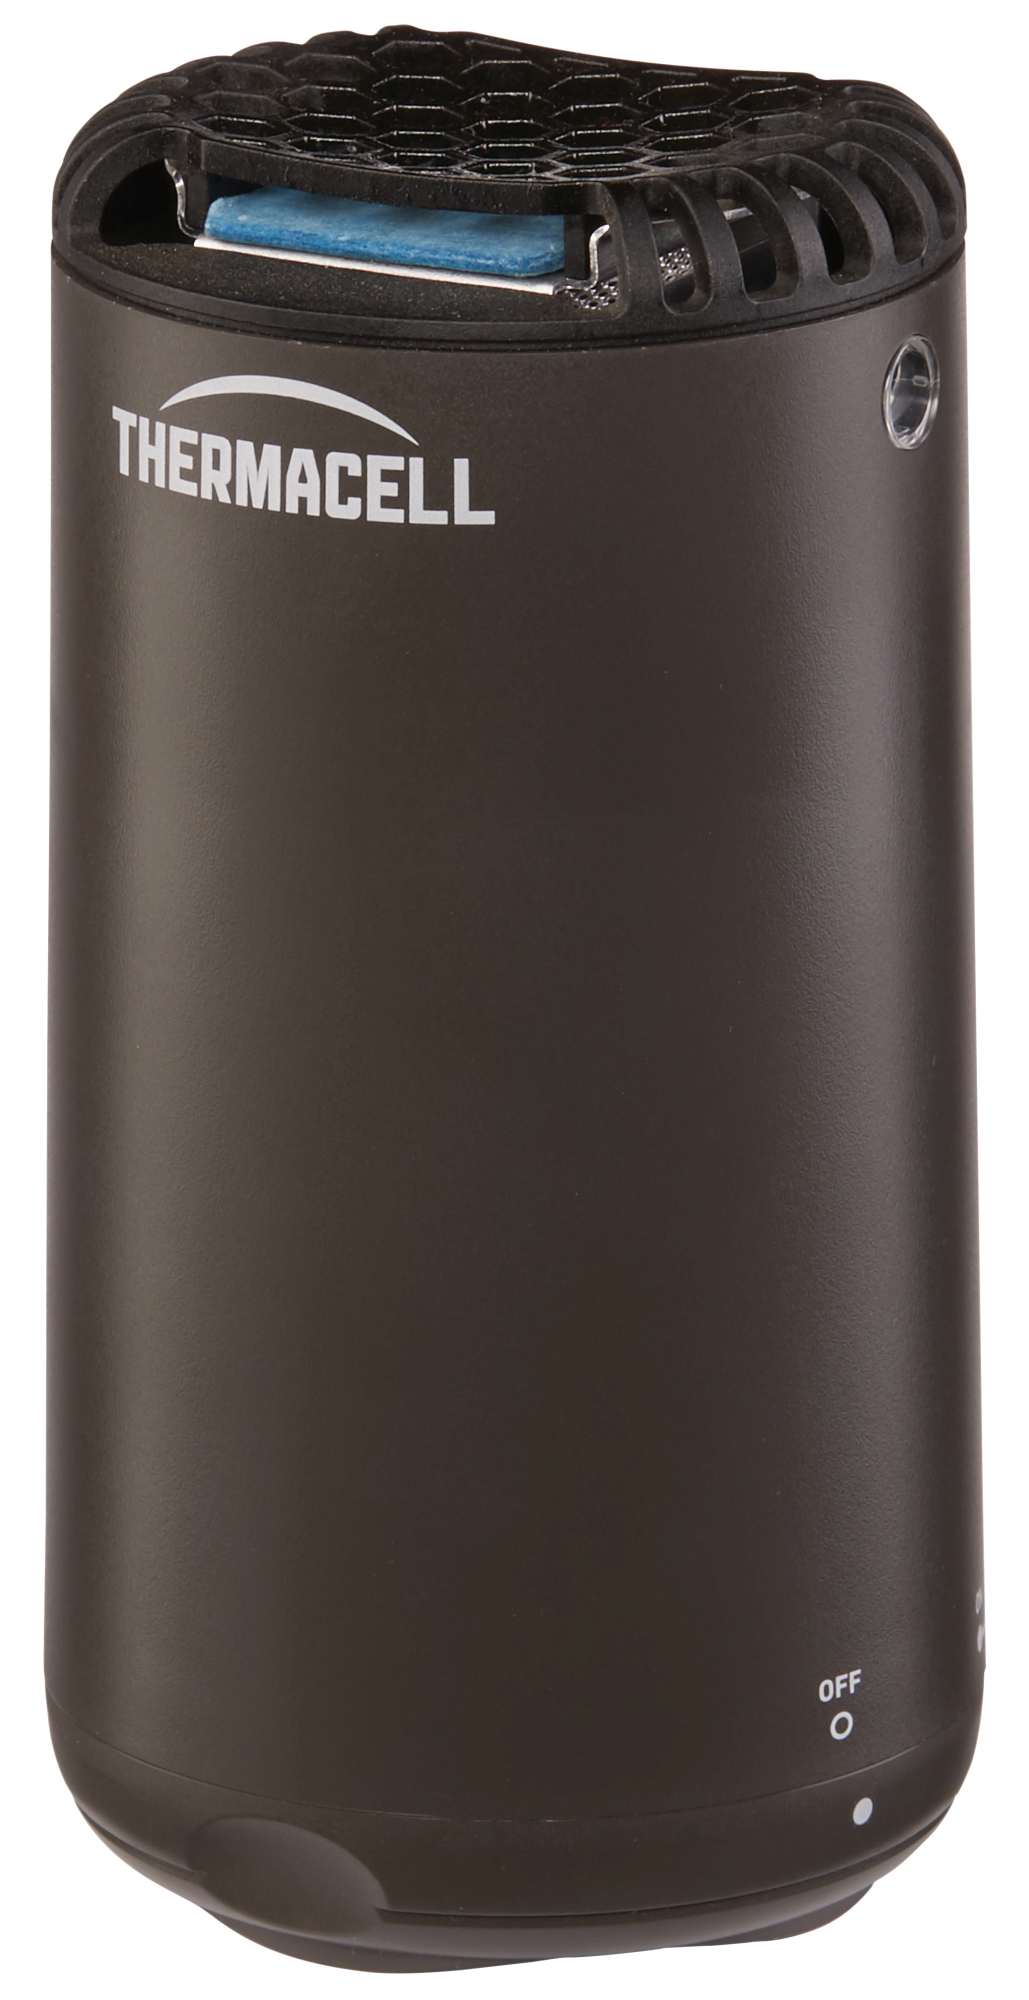 Thermacell Halo Mini  - Stechmückenschutz, graphit